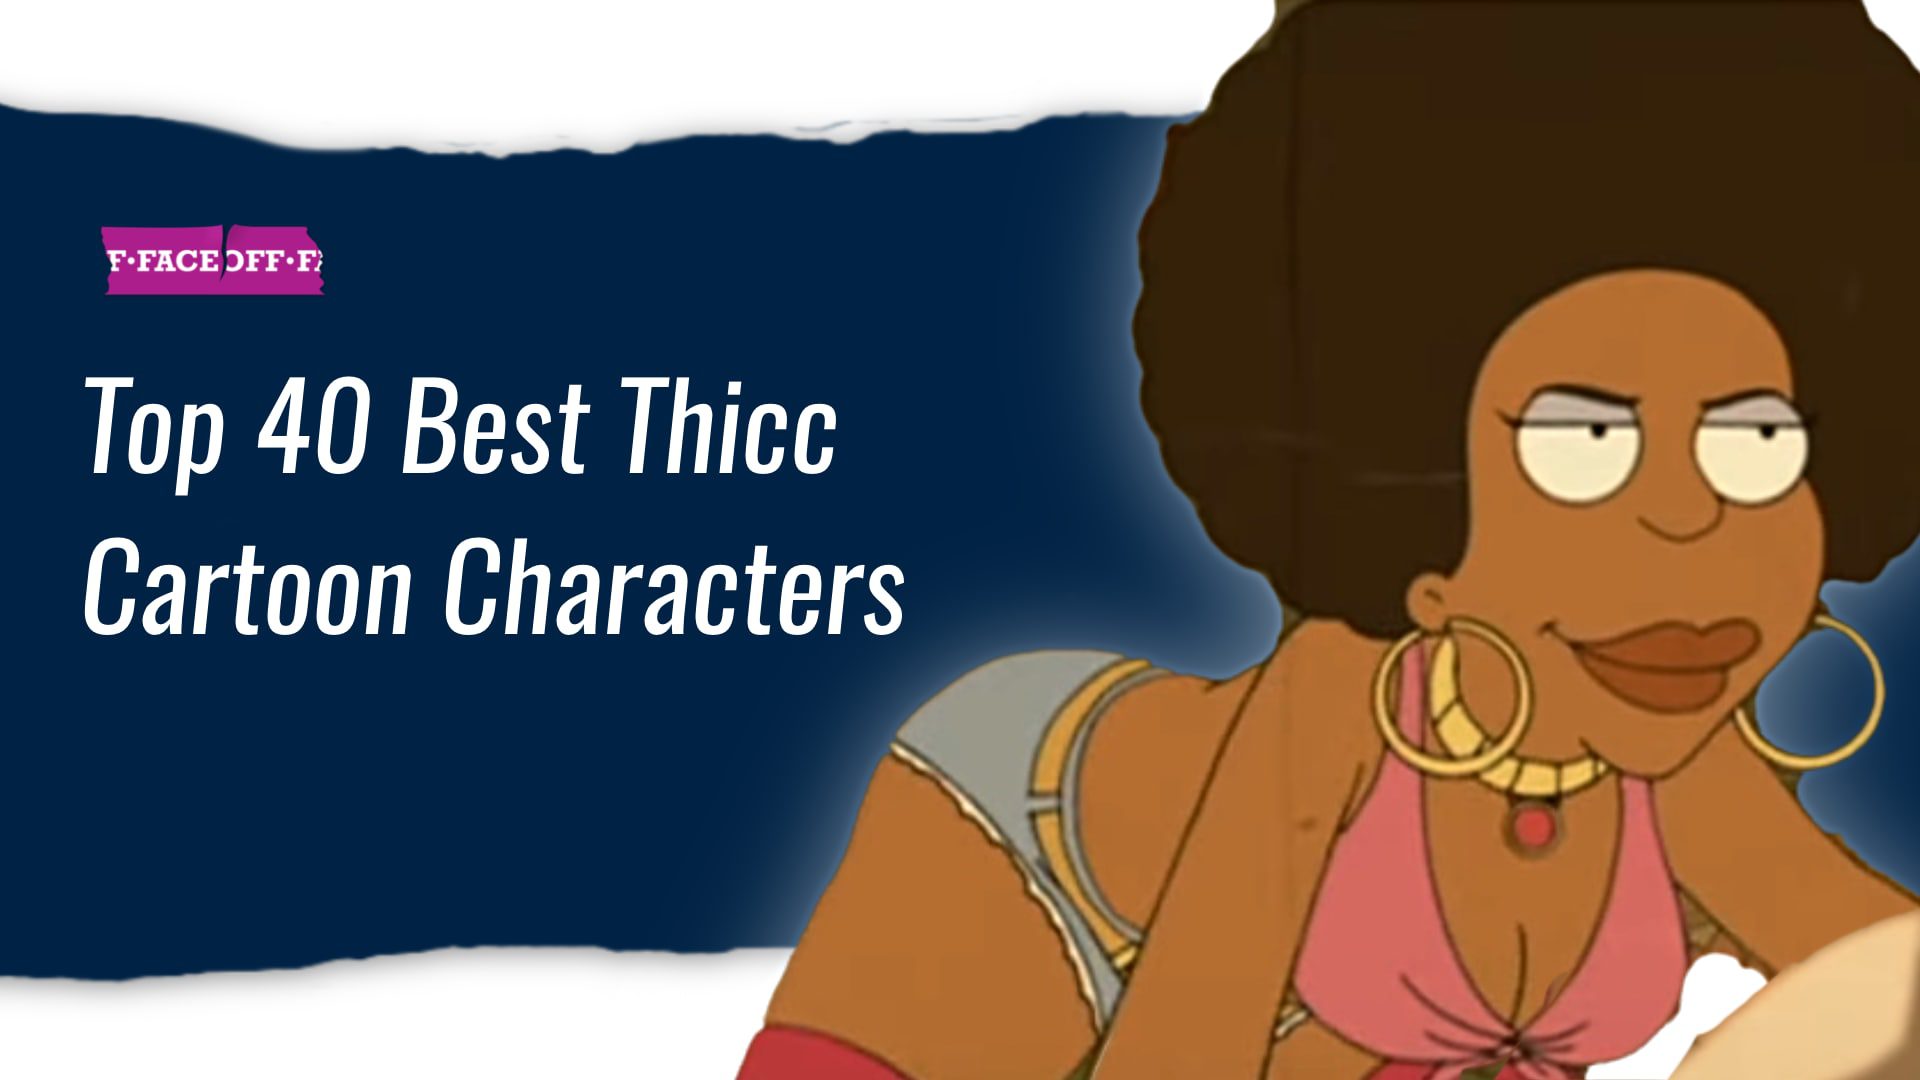 Top 40 Best Thicc Cartoon Characters